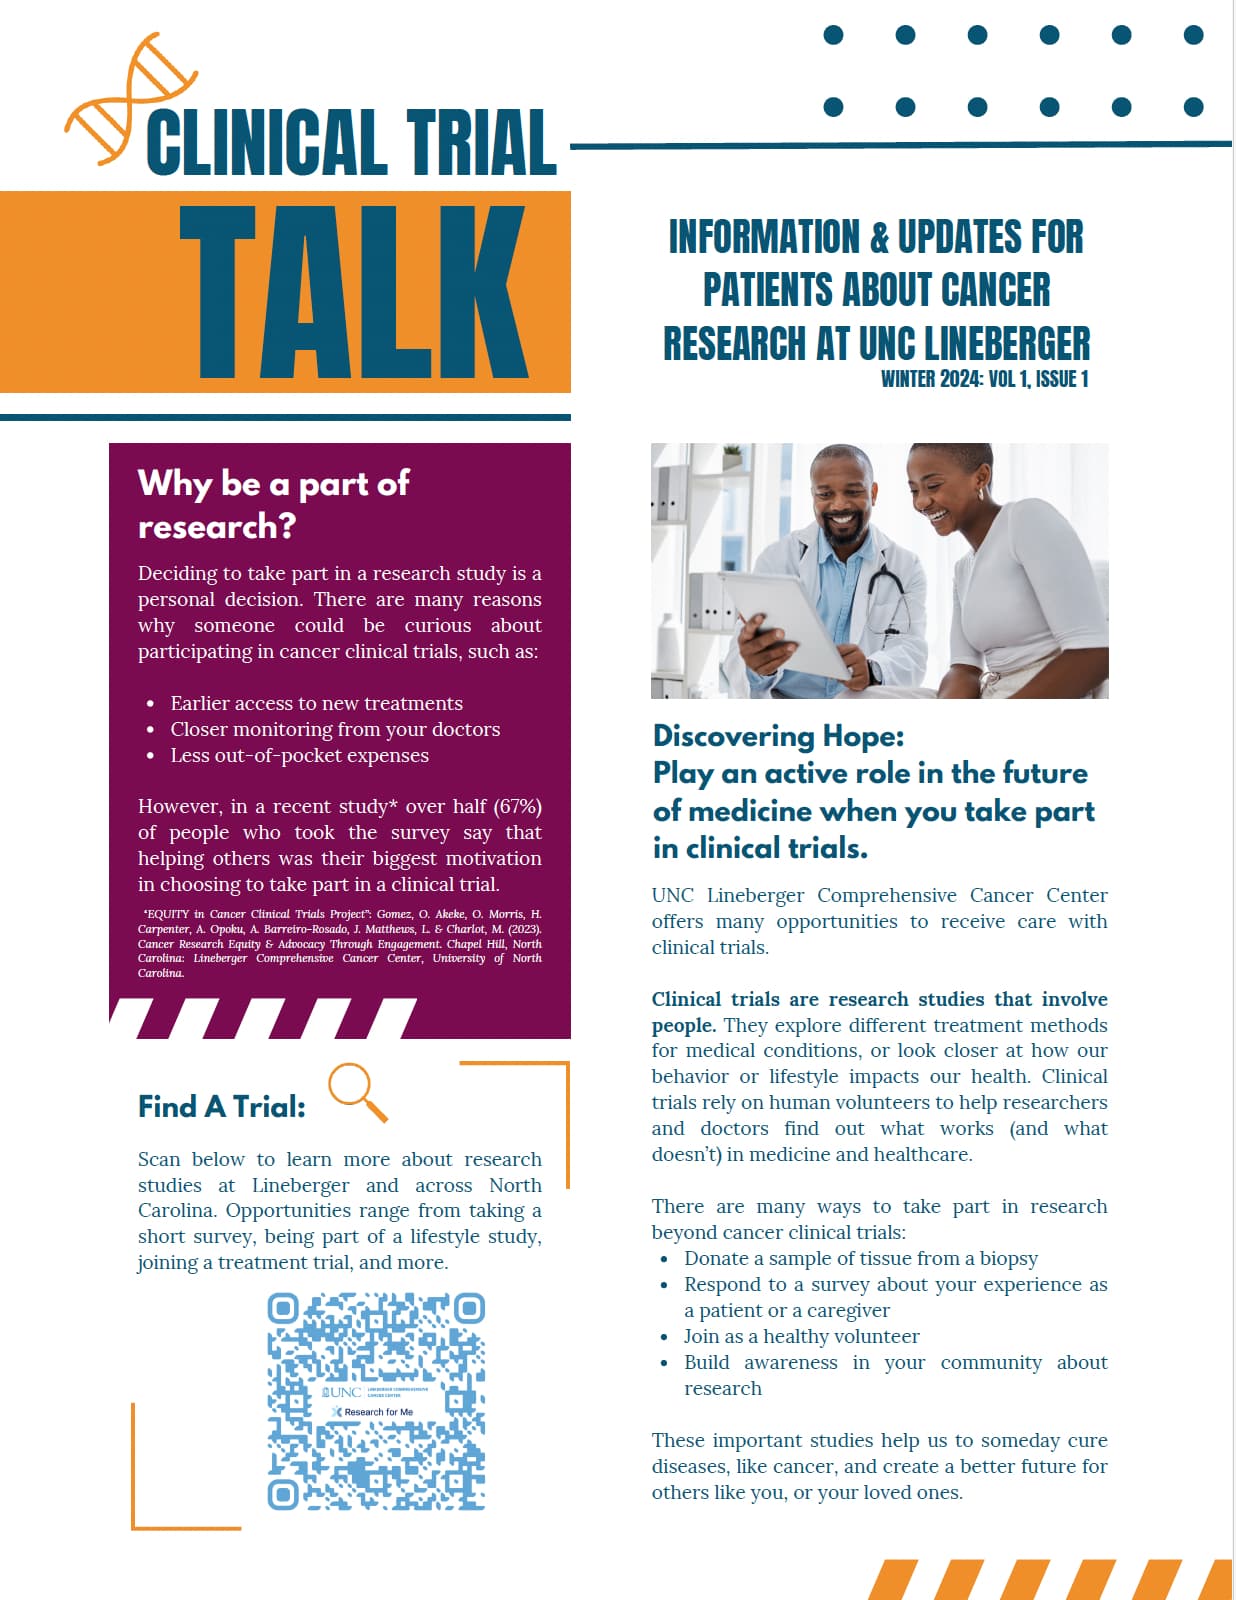 Front page of volume 1, issue 1 of the Clinical Trial Talk newsletter.